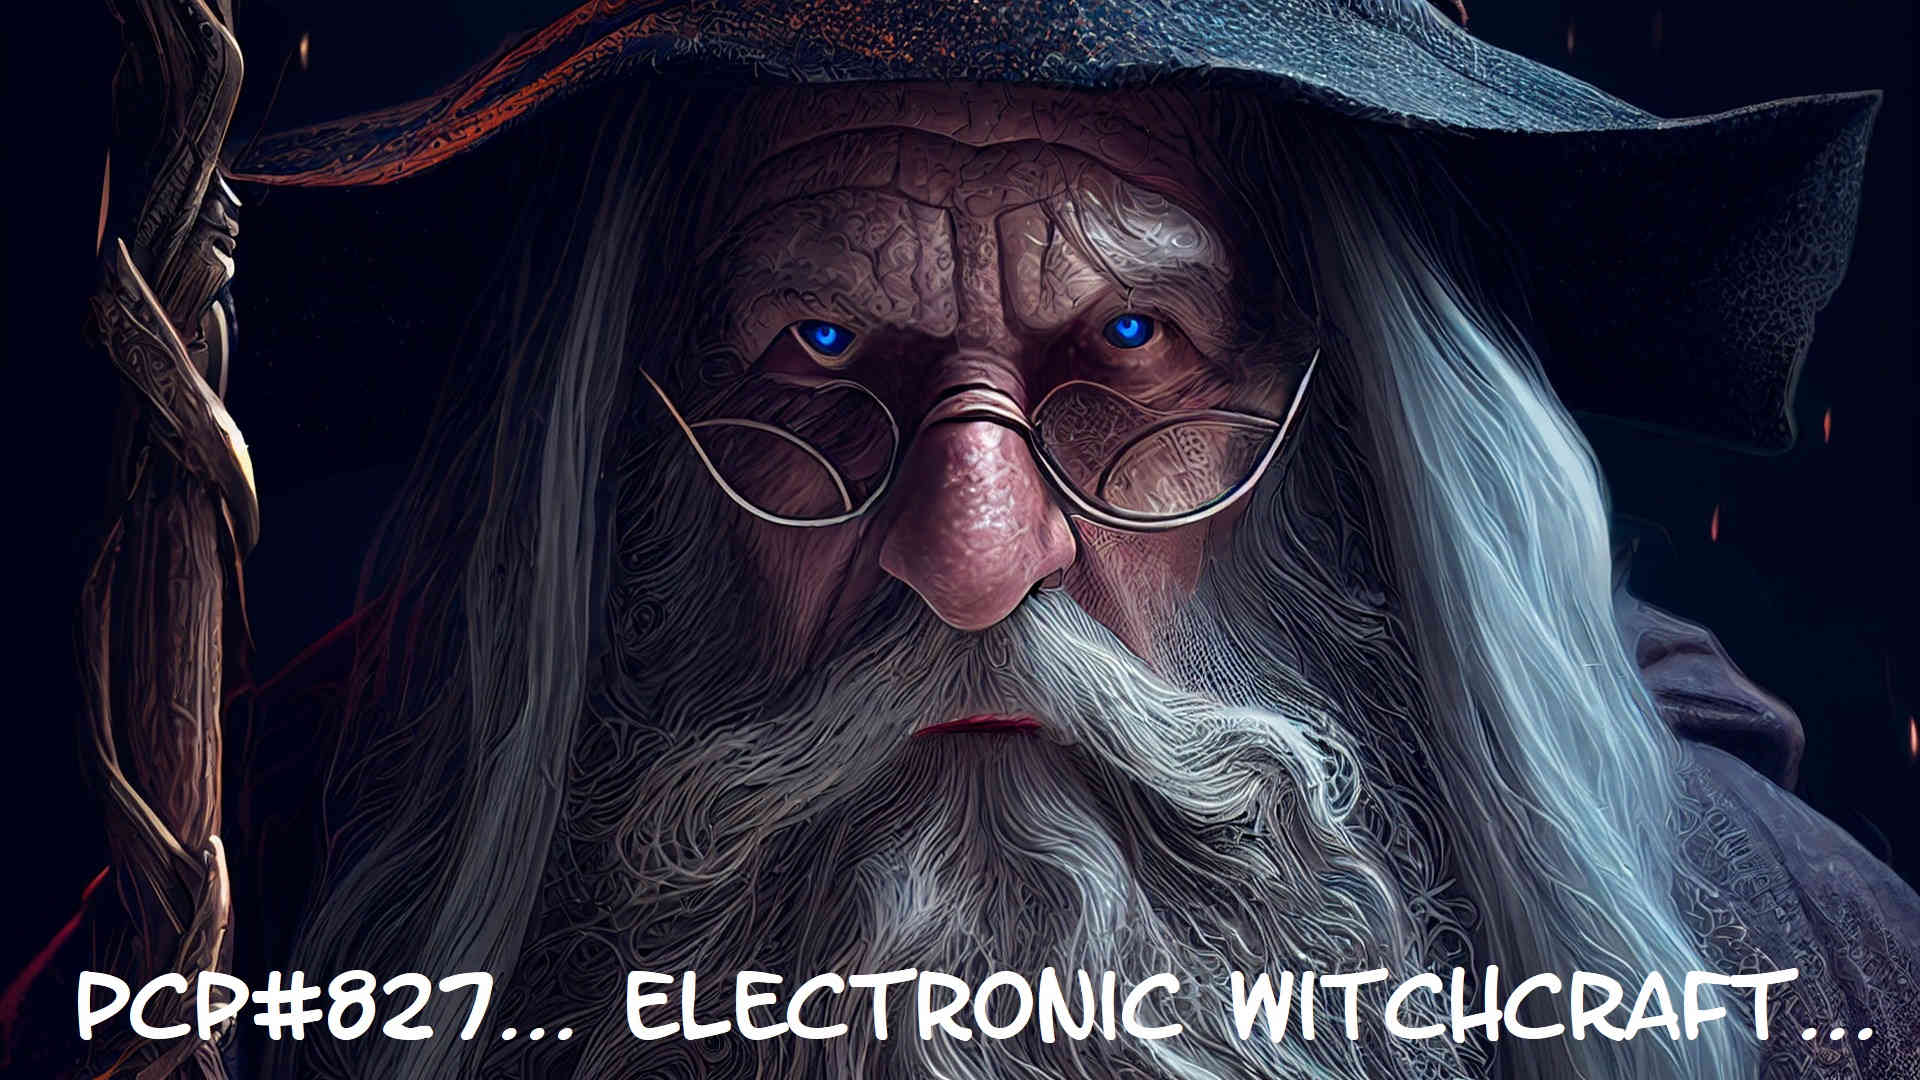 PCP#827... Electronic Witchcraft...